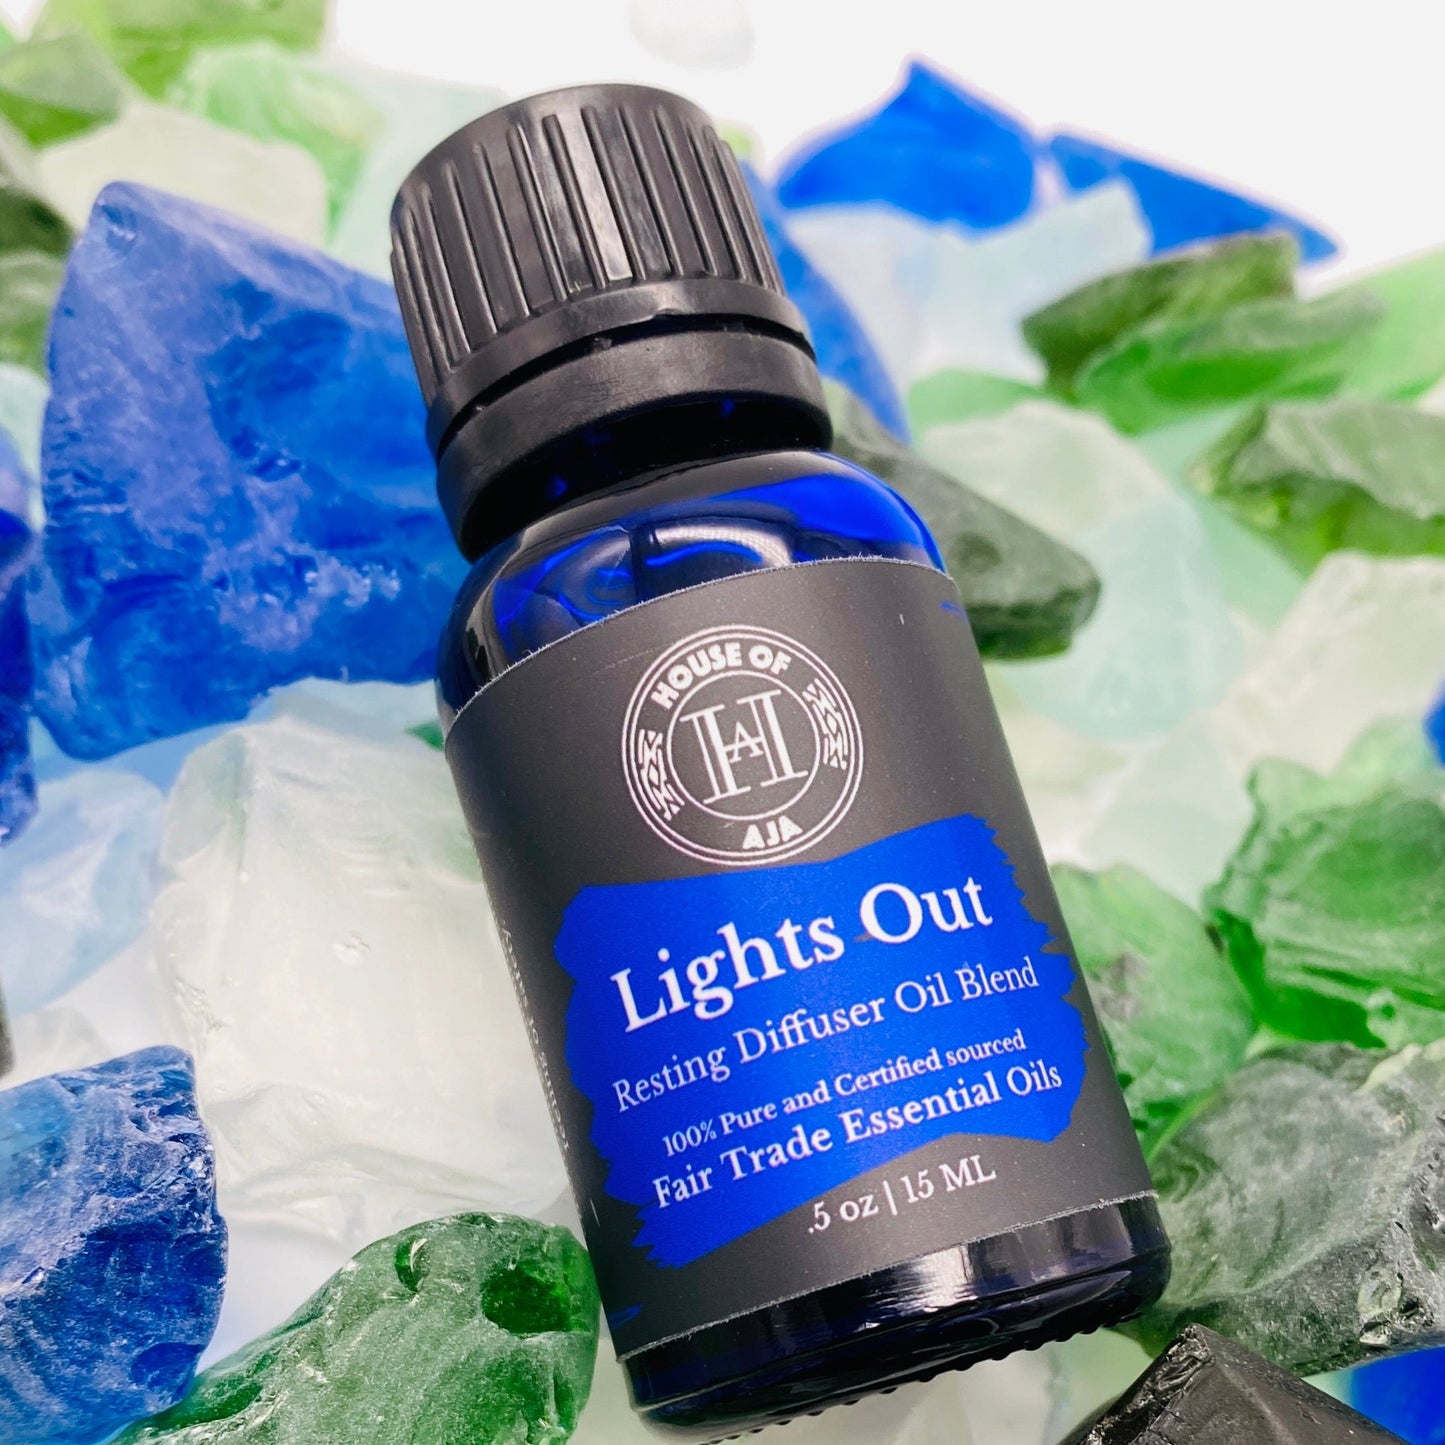 When you're trying to get to bed and it's not working. Try our lights out diffuser blend that promotes relaxation, emotional grounding and the feeling of safety. Just what you may need to get a good night's rest. 